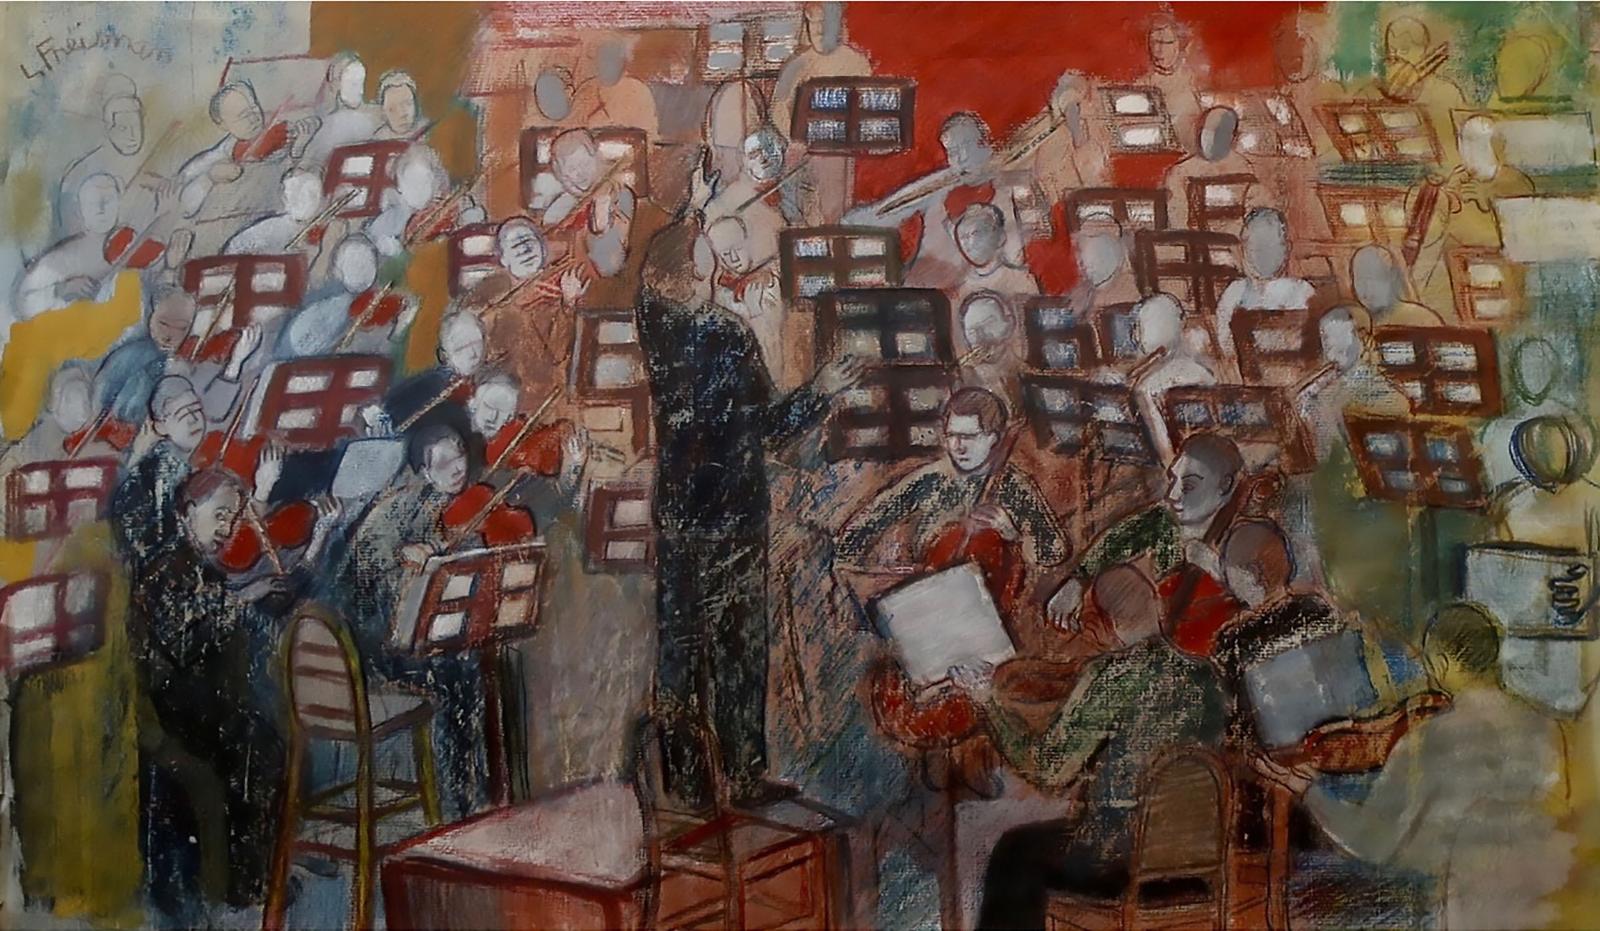 Lillian Freiman (1908-1986) - Untitled (The Conductor)